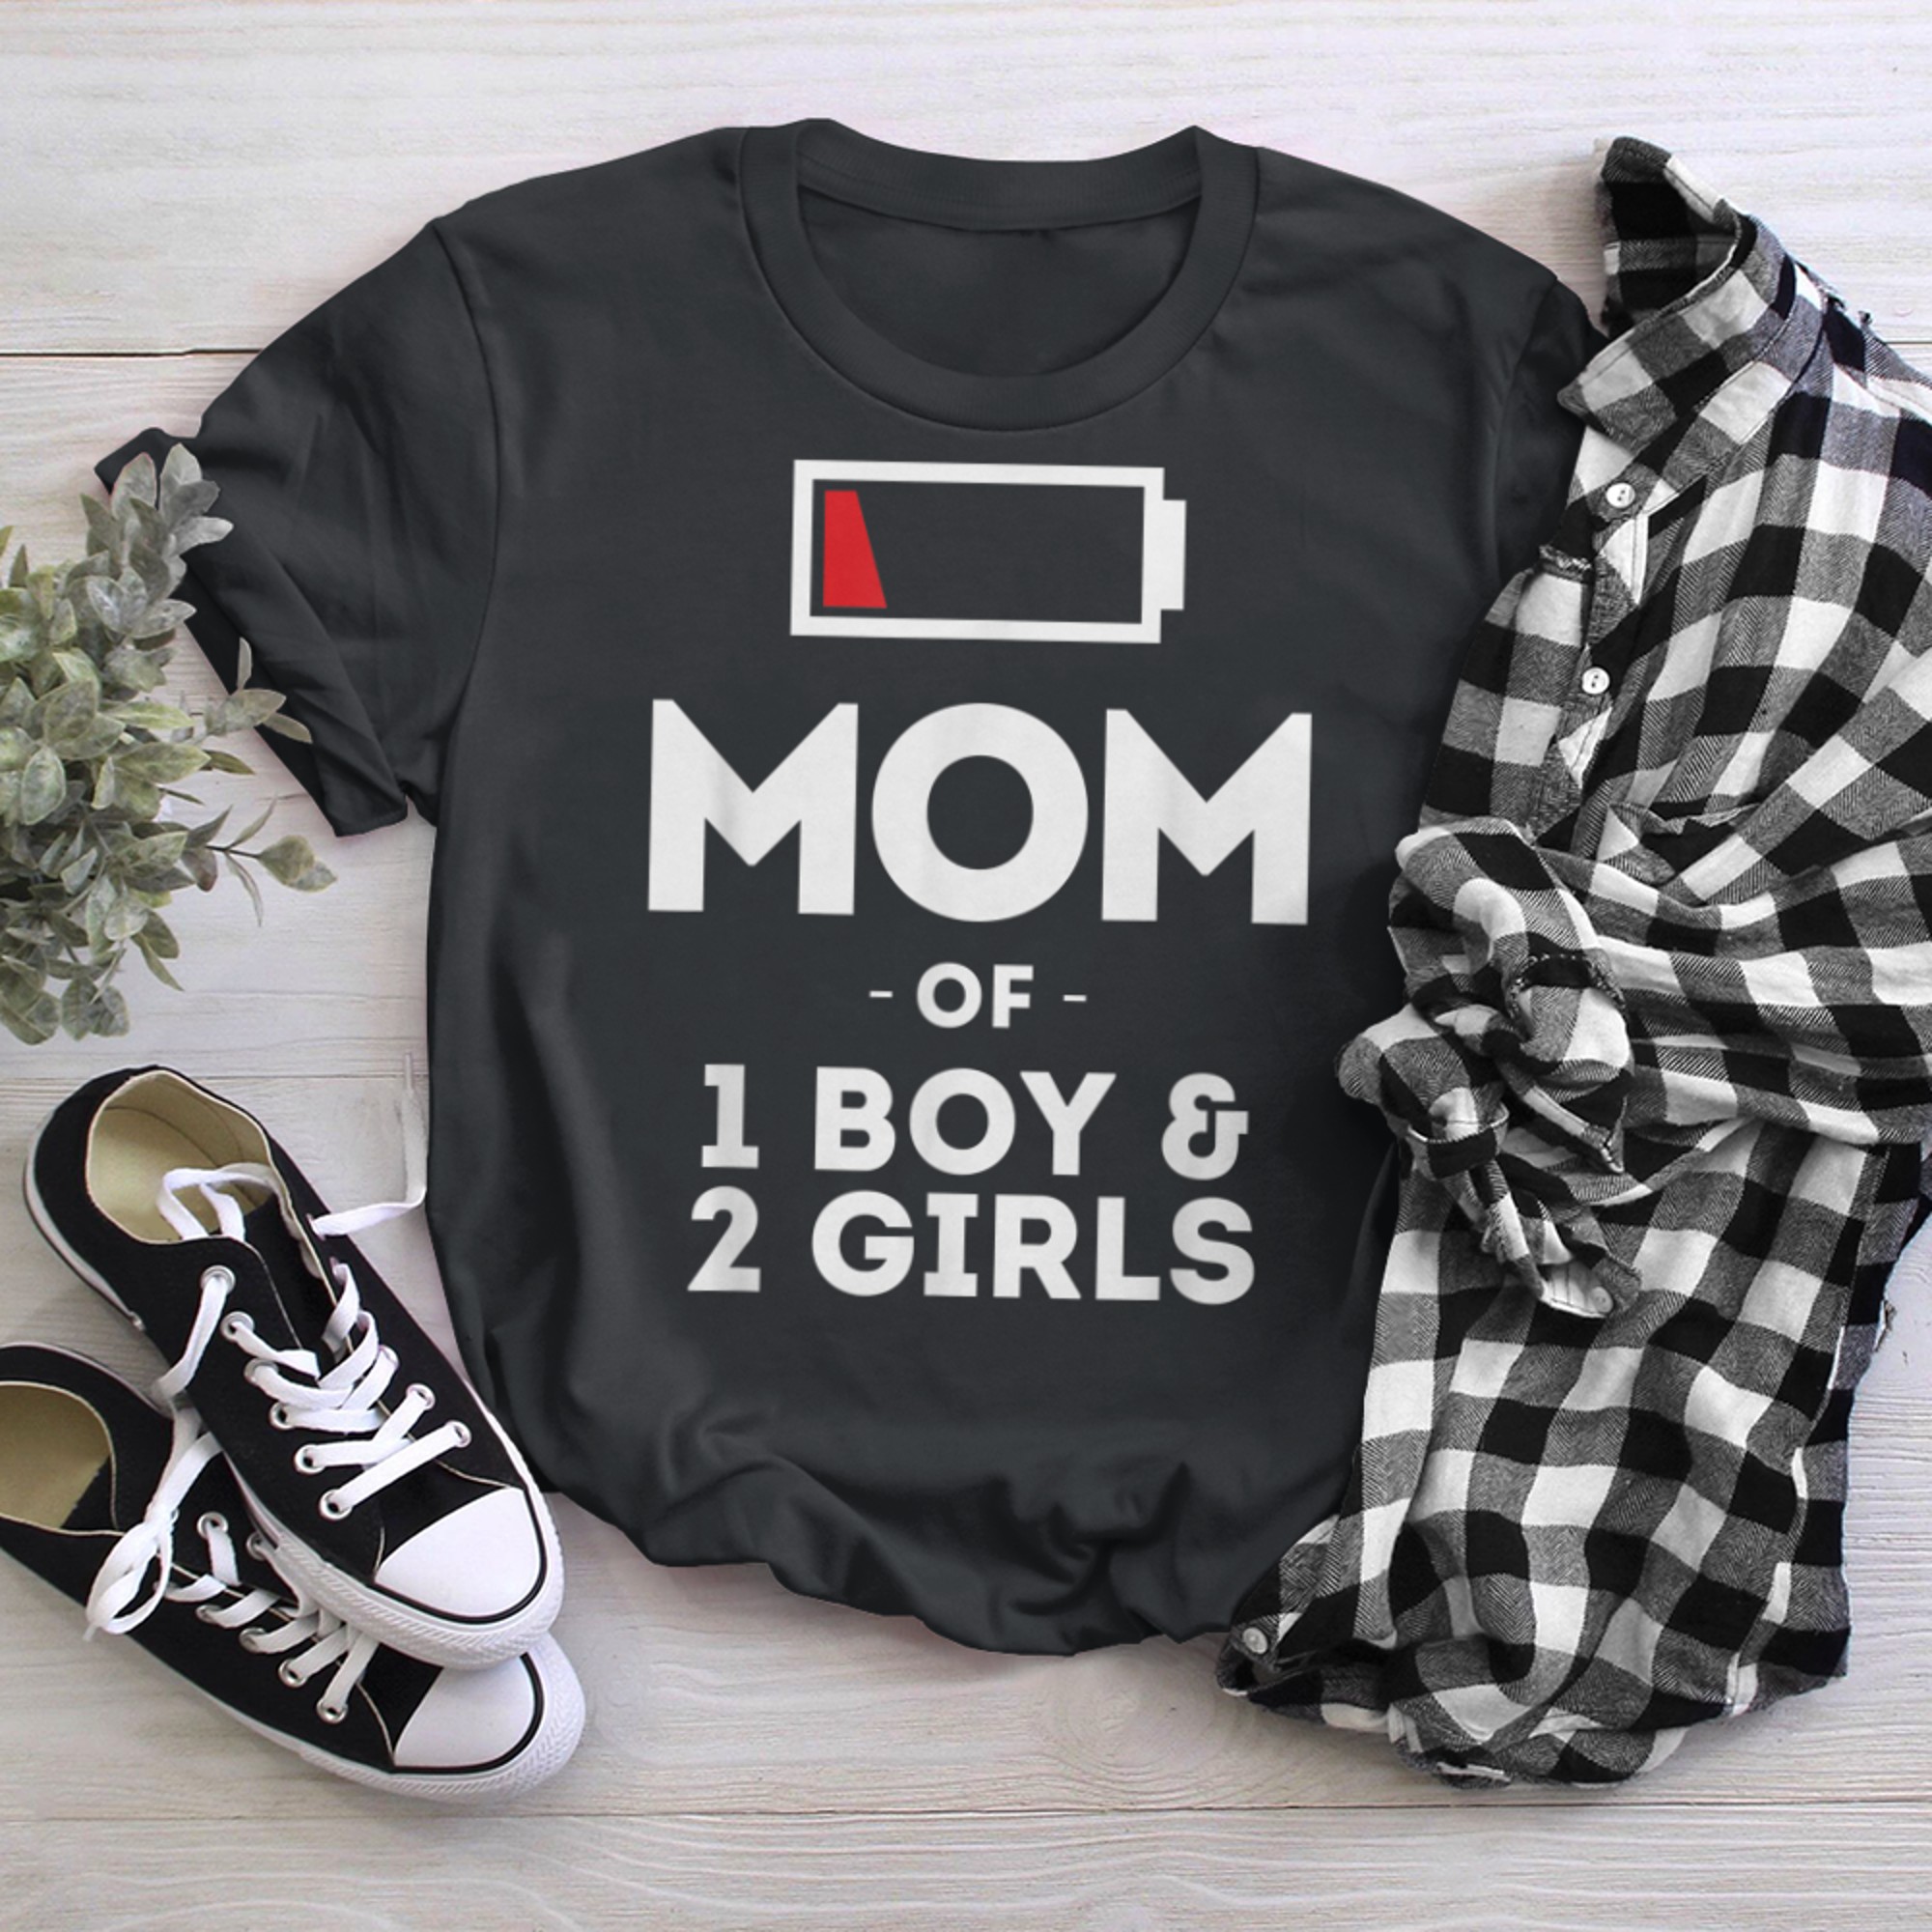 Mom of Clothing Mother Wife Funny t-shirt black